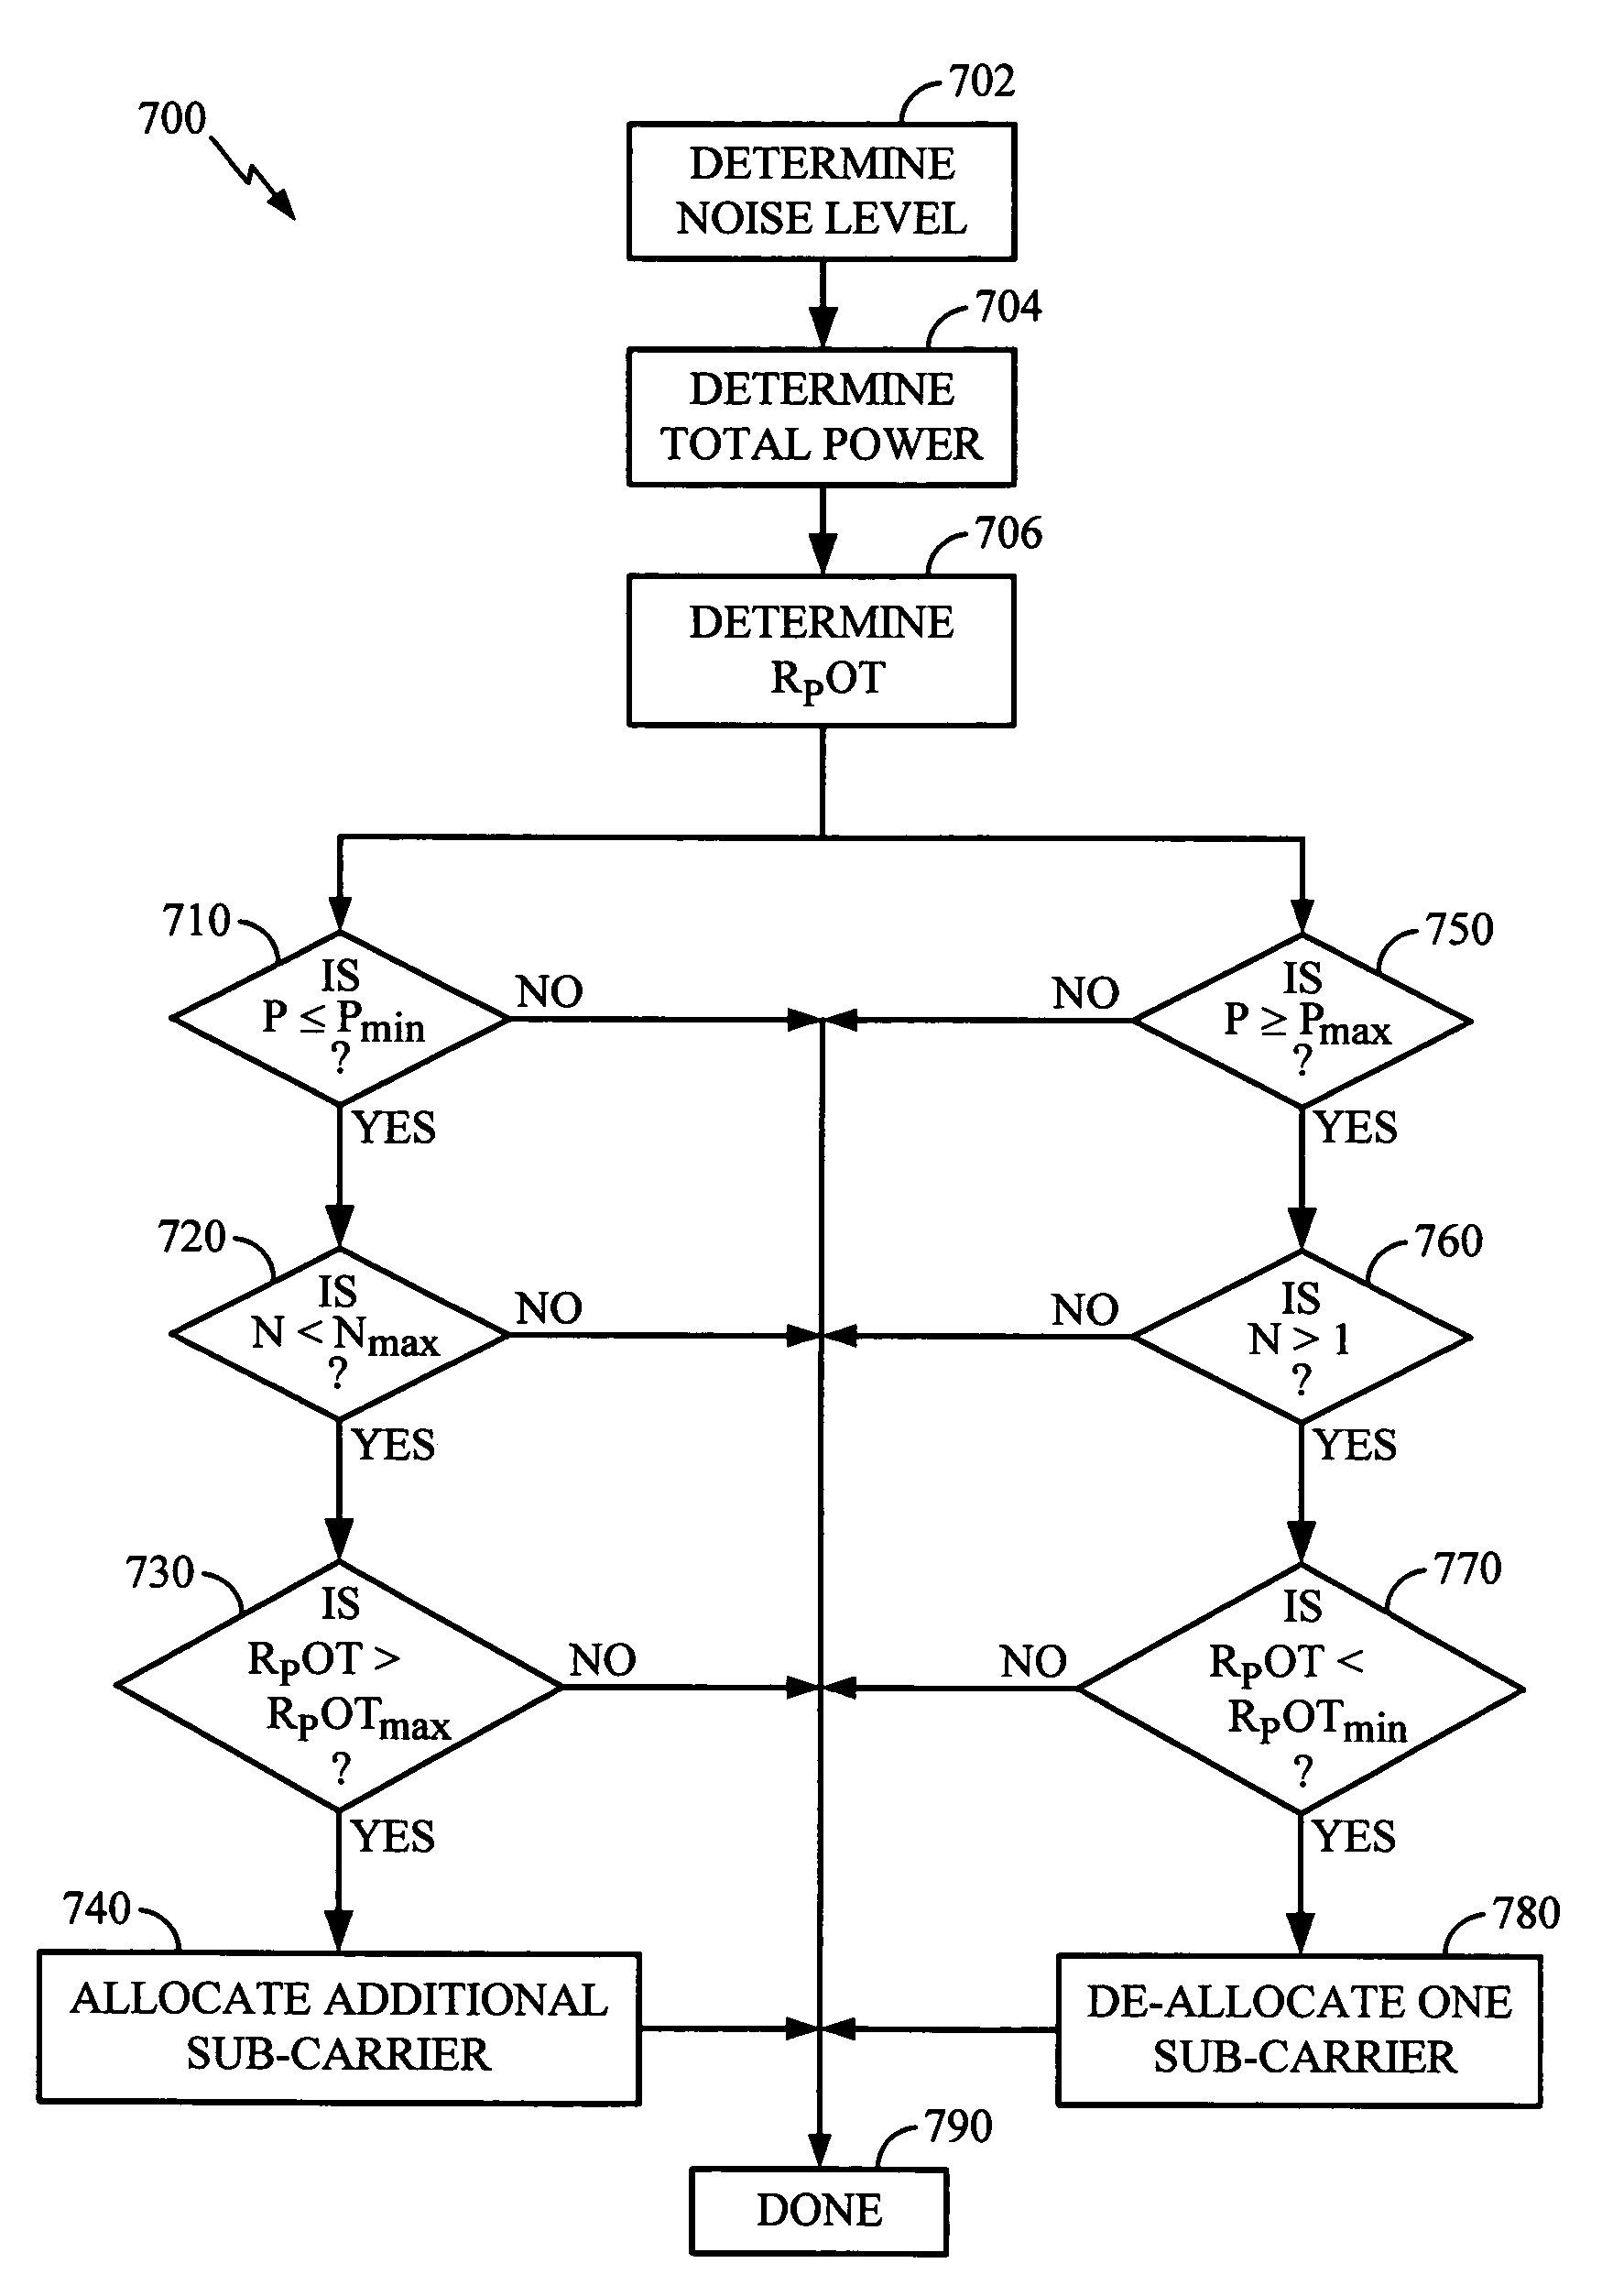 Power control and scheduling in an OFDM system